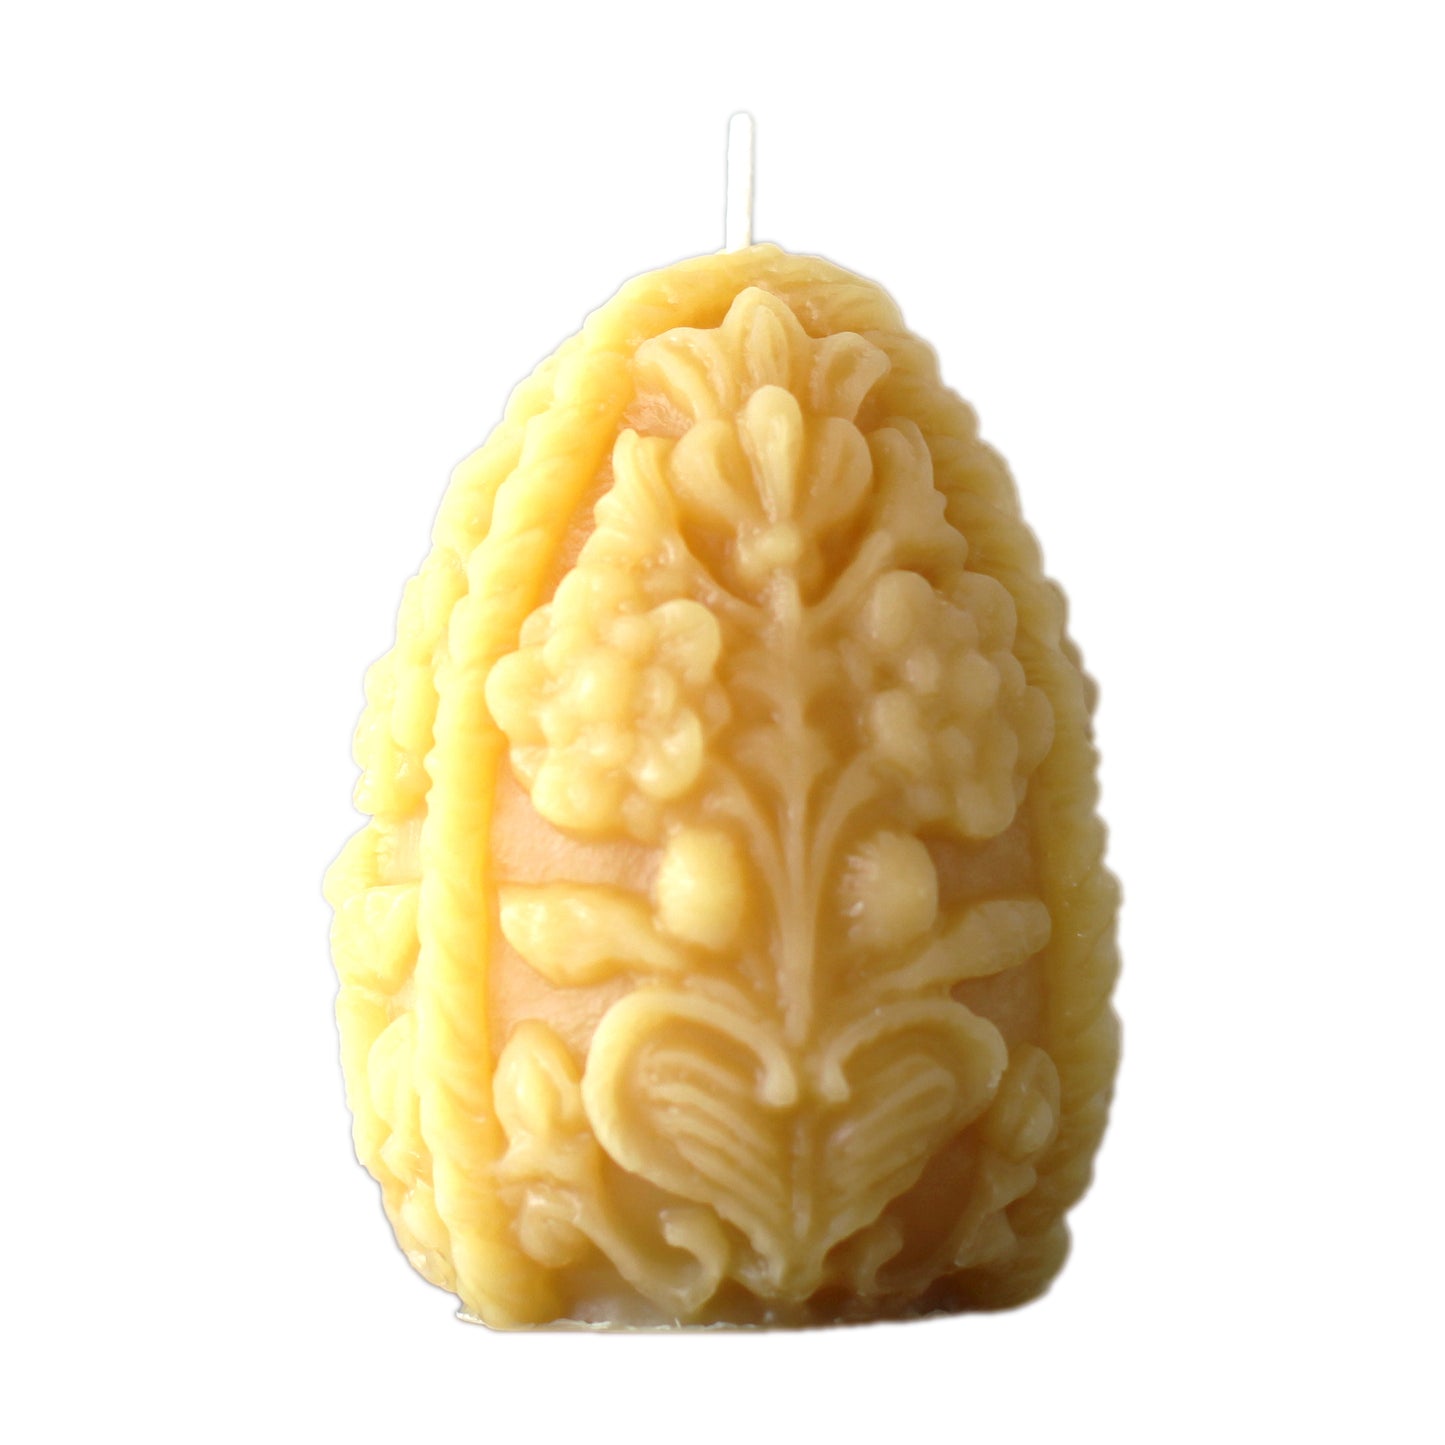 A product photo of a beeswax Easter egg shaped candle on a white background. The egg candle has an ornate decorative design. 